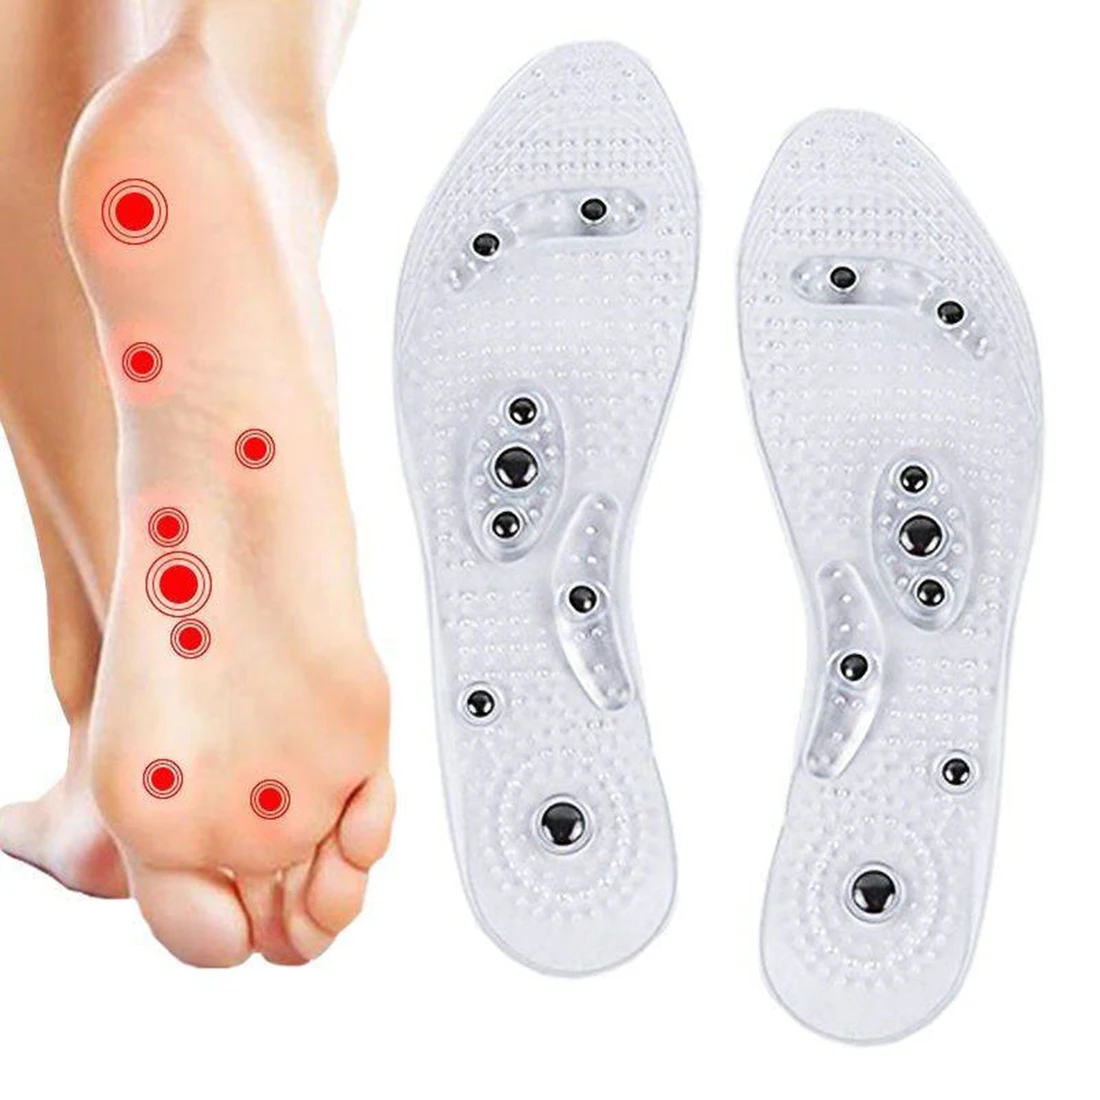 

Magnetic Pain Relief Foot Inserts Therapy Insoles Transparent Slimming Insole Massage Foot Care Shoe Pad Sole Unisex Weight Loss